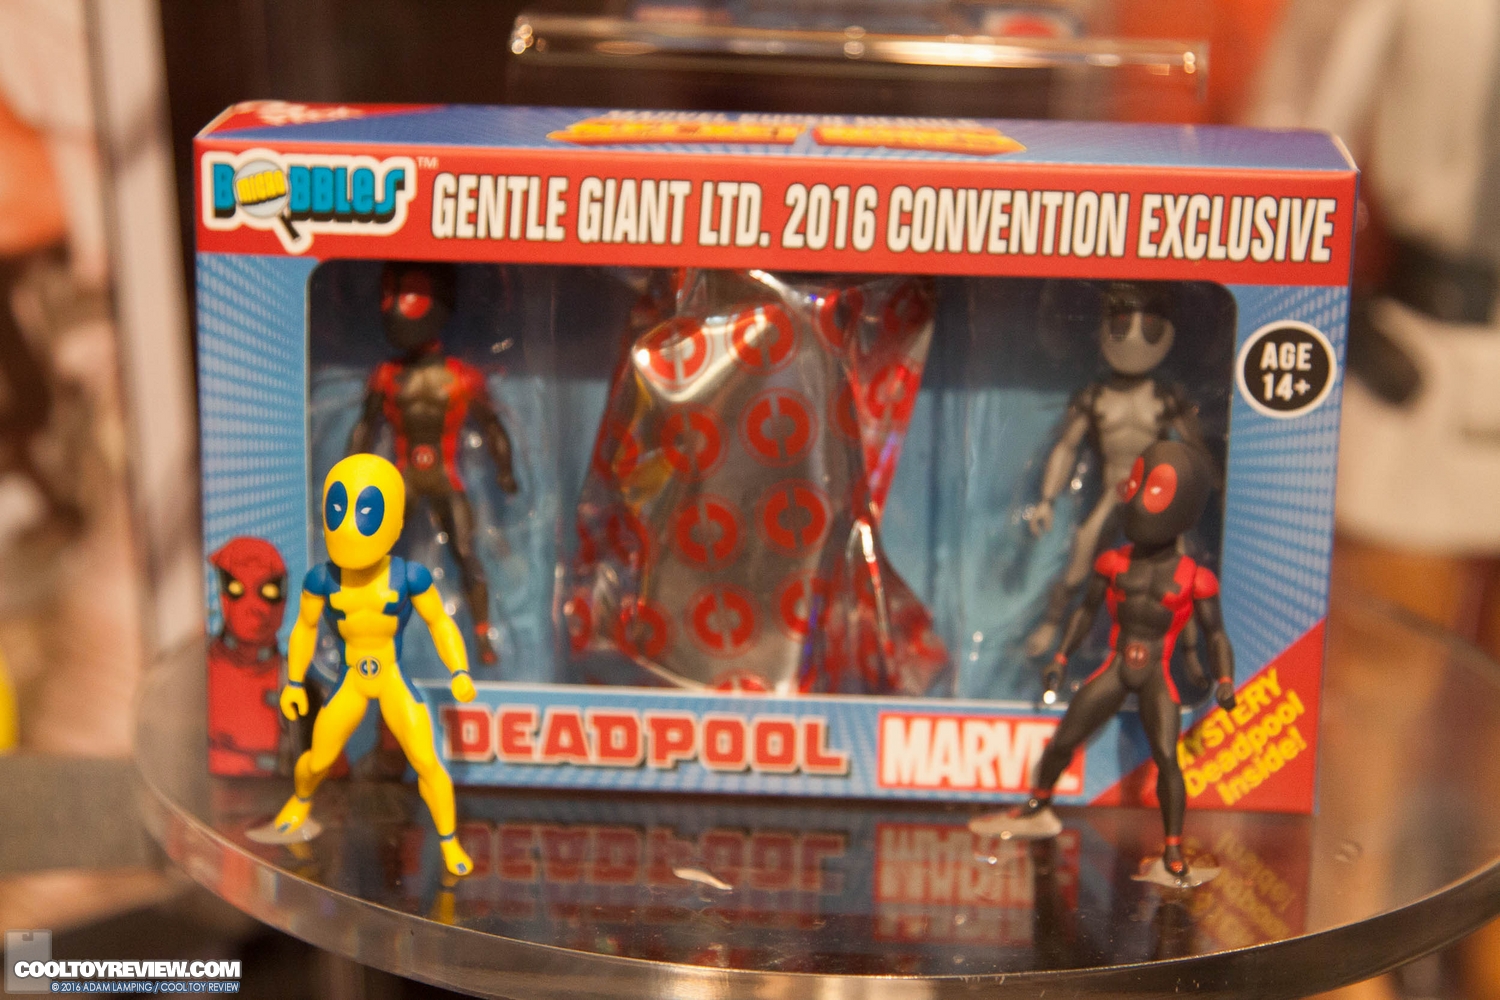 san-diego-comic-con-gentle-giant-booth-047.jpg